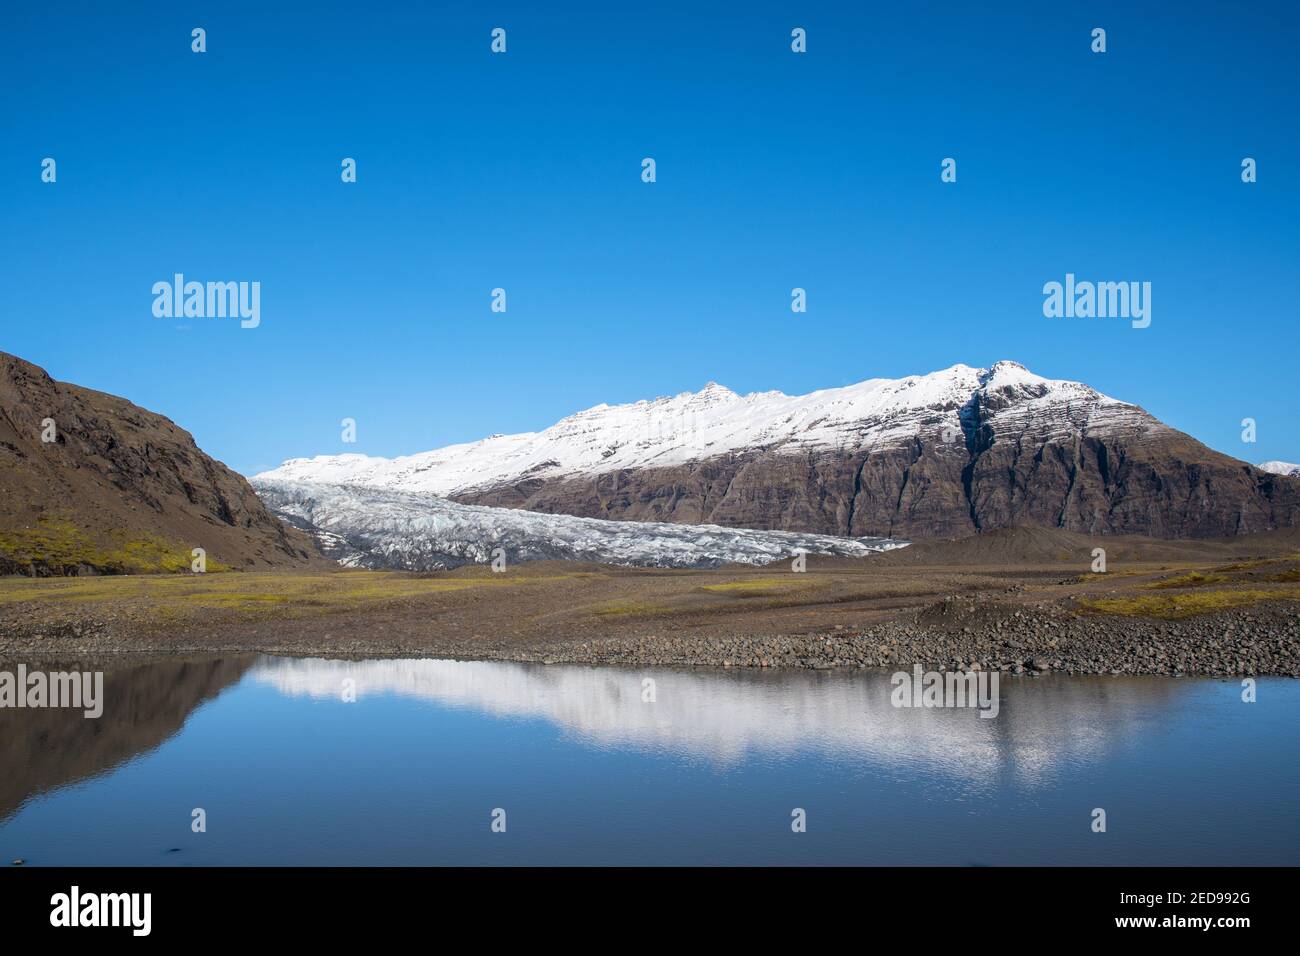 River Holmsa, Glacier Flaajokull and mountain and Flafjall mountain on a summer day in south Iceland Stock Photo